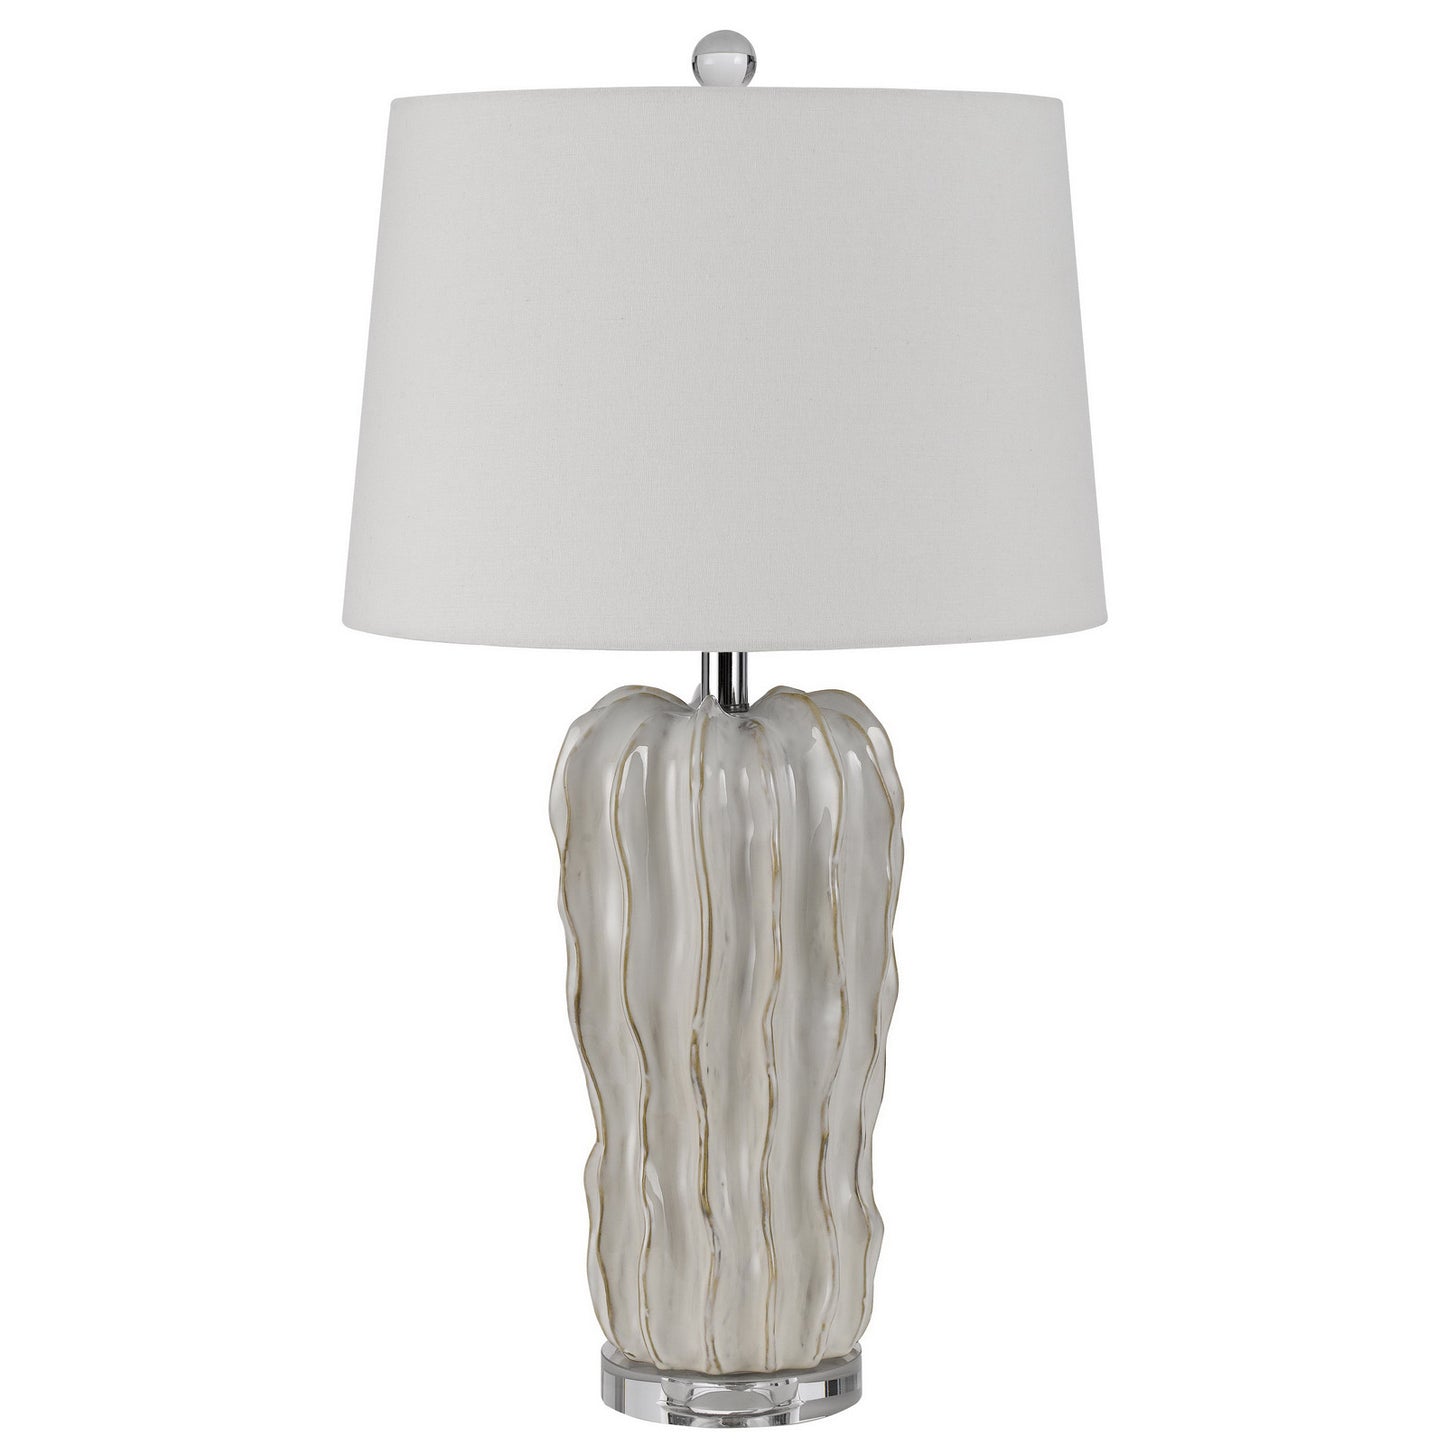 28" Pearl Glass Table Lamp With White Empire Shade